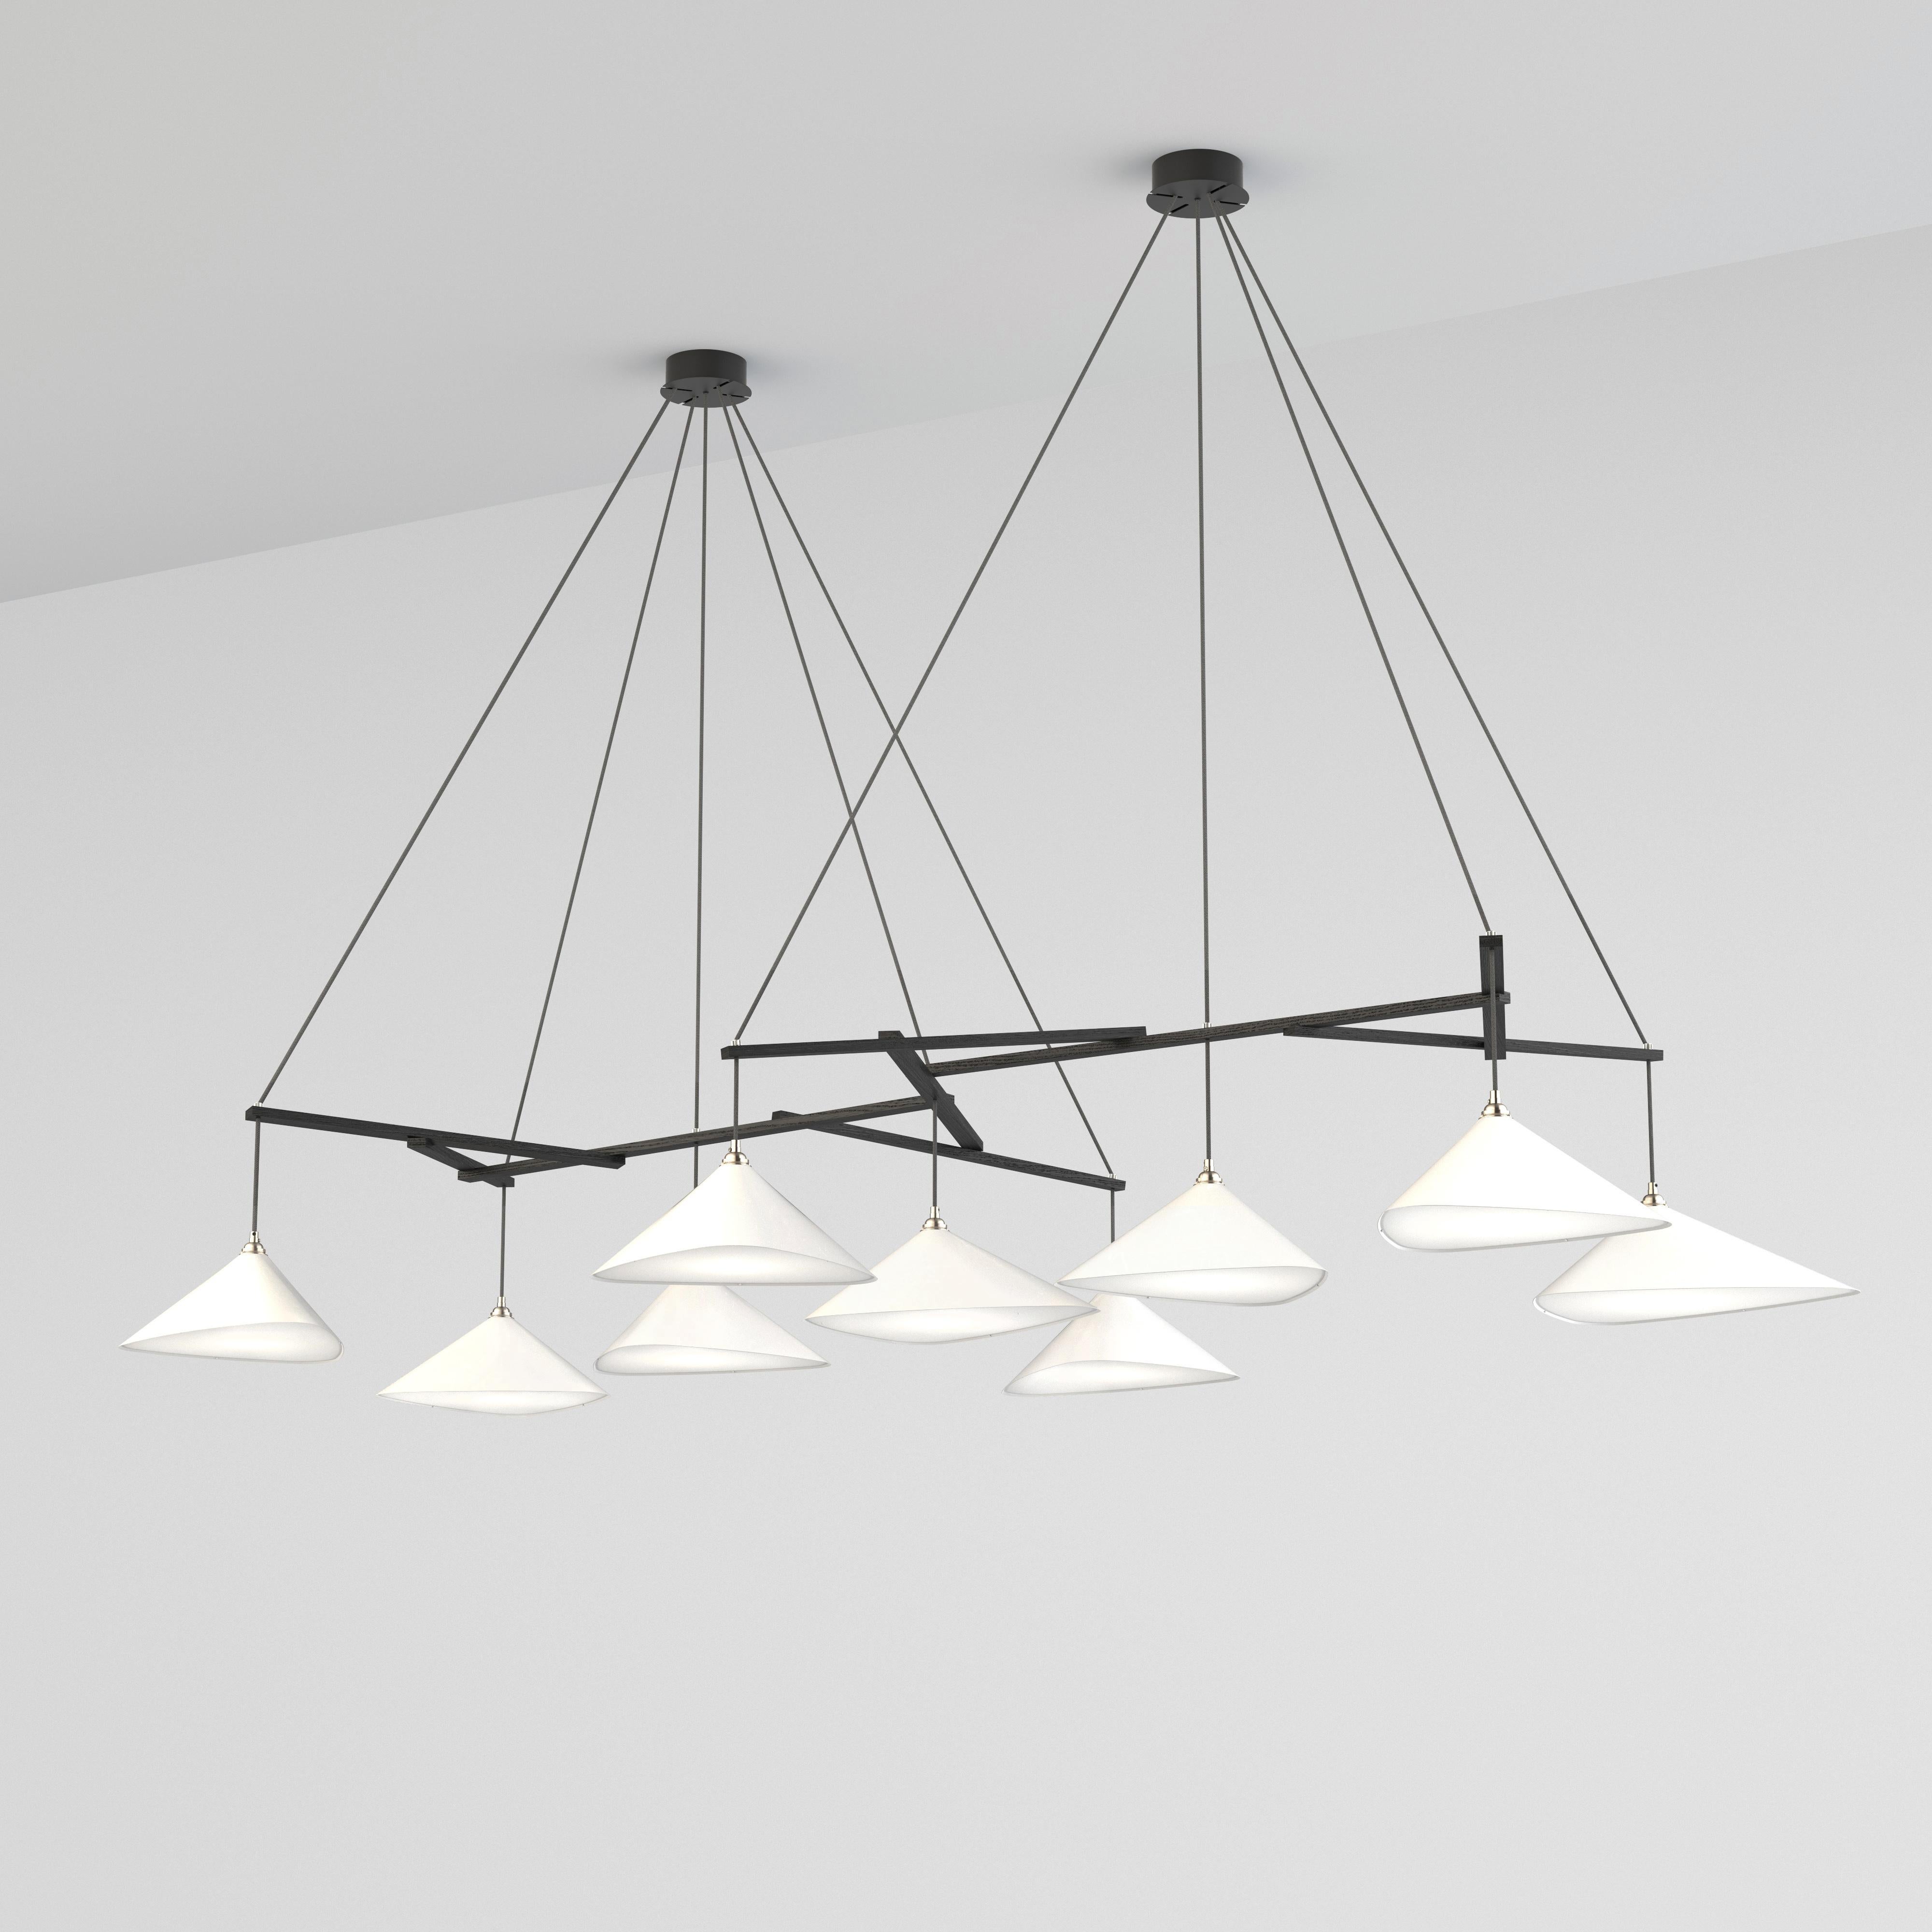 Monumental Daniel Becker 'Emily 9' Chandelier in Matte White for Moss Objects. Designed by Berlin luminary Daniel Becker and handmade to order using mid-century manufacturing techniques. Executed in high-quality sheet metal with matte white paint, a